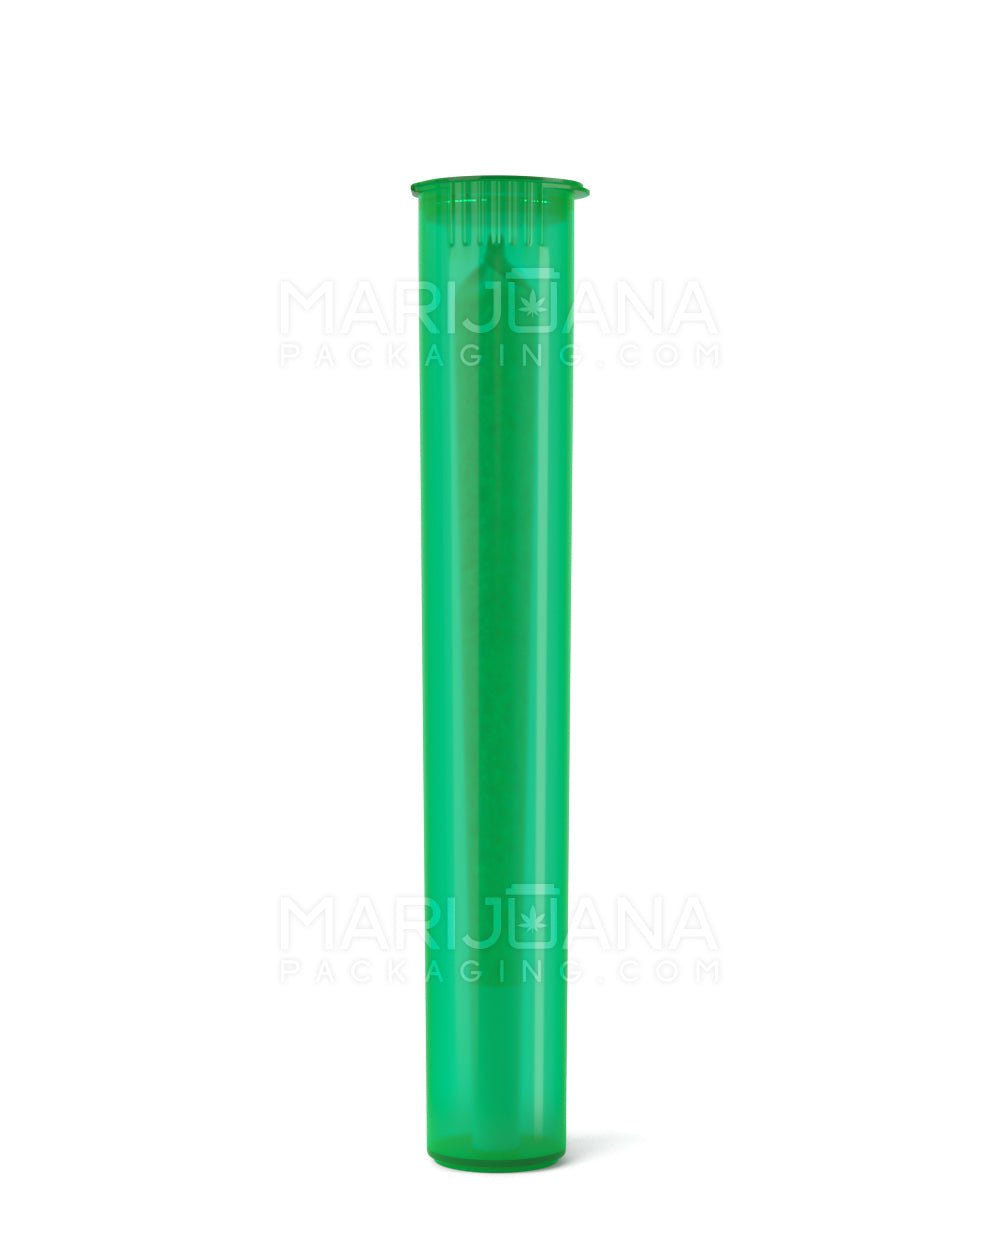 Child Resistant | King Size Pop Top Translucent Plastic Pre-Roll Tubes | 116mm - Green - 1000 Count - 3